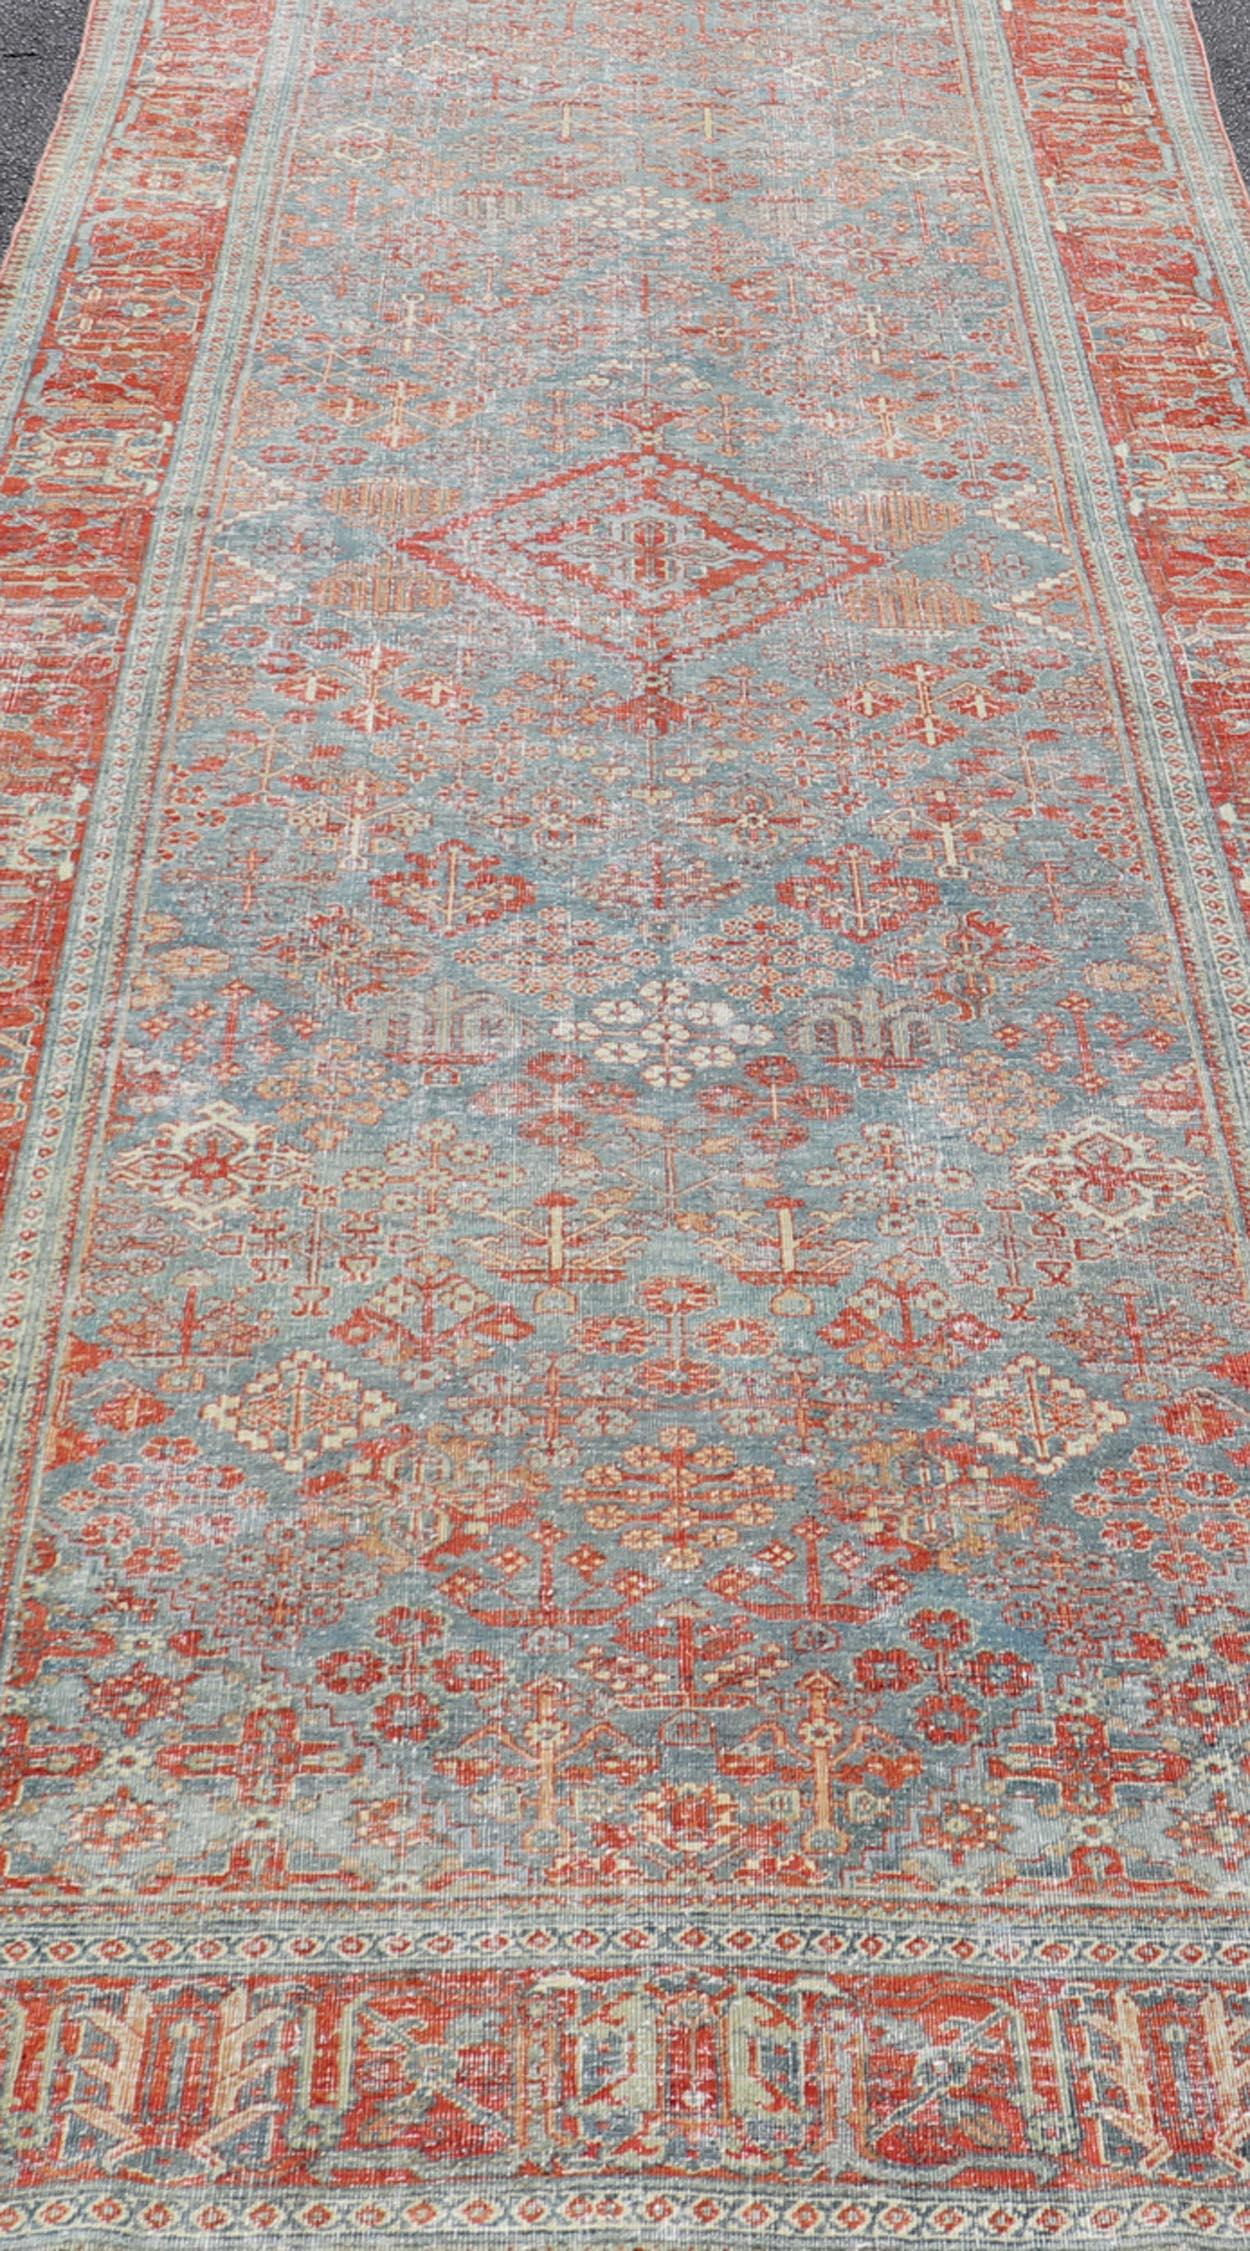 Antique Persian Joshaghan Gallery Rug with All-Over Sub-Geometric Diamond Design For Sale 3